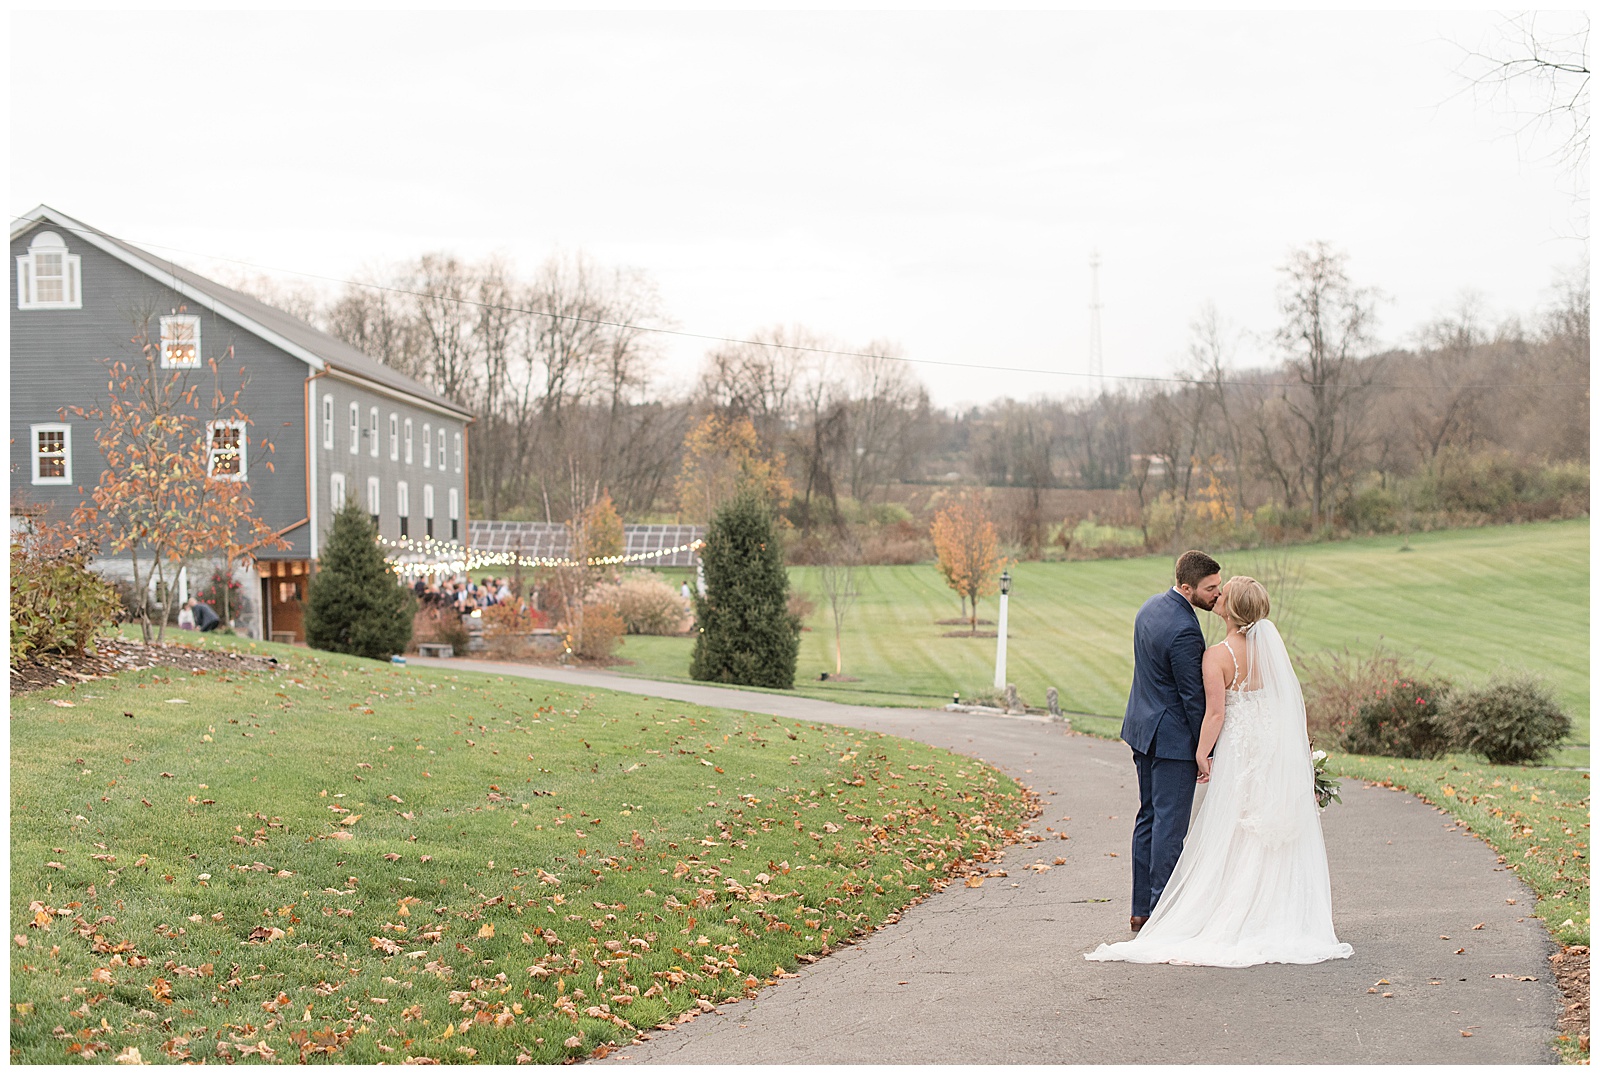 couple kissing while standing on paved path that leads to reception with their backs toward camera at historic ashland